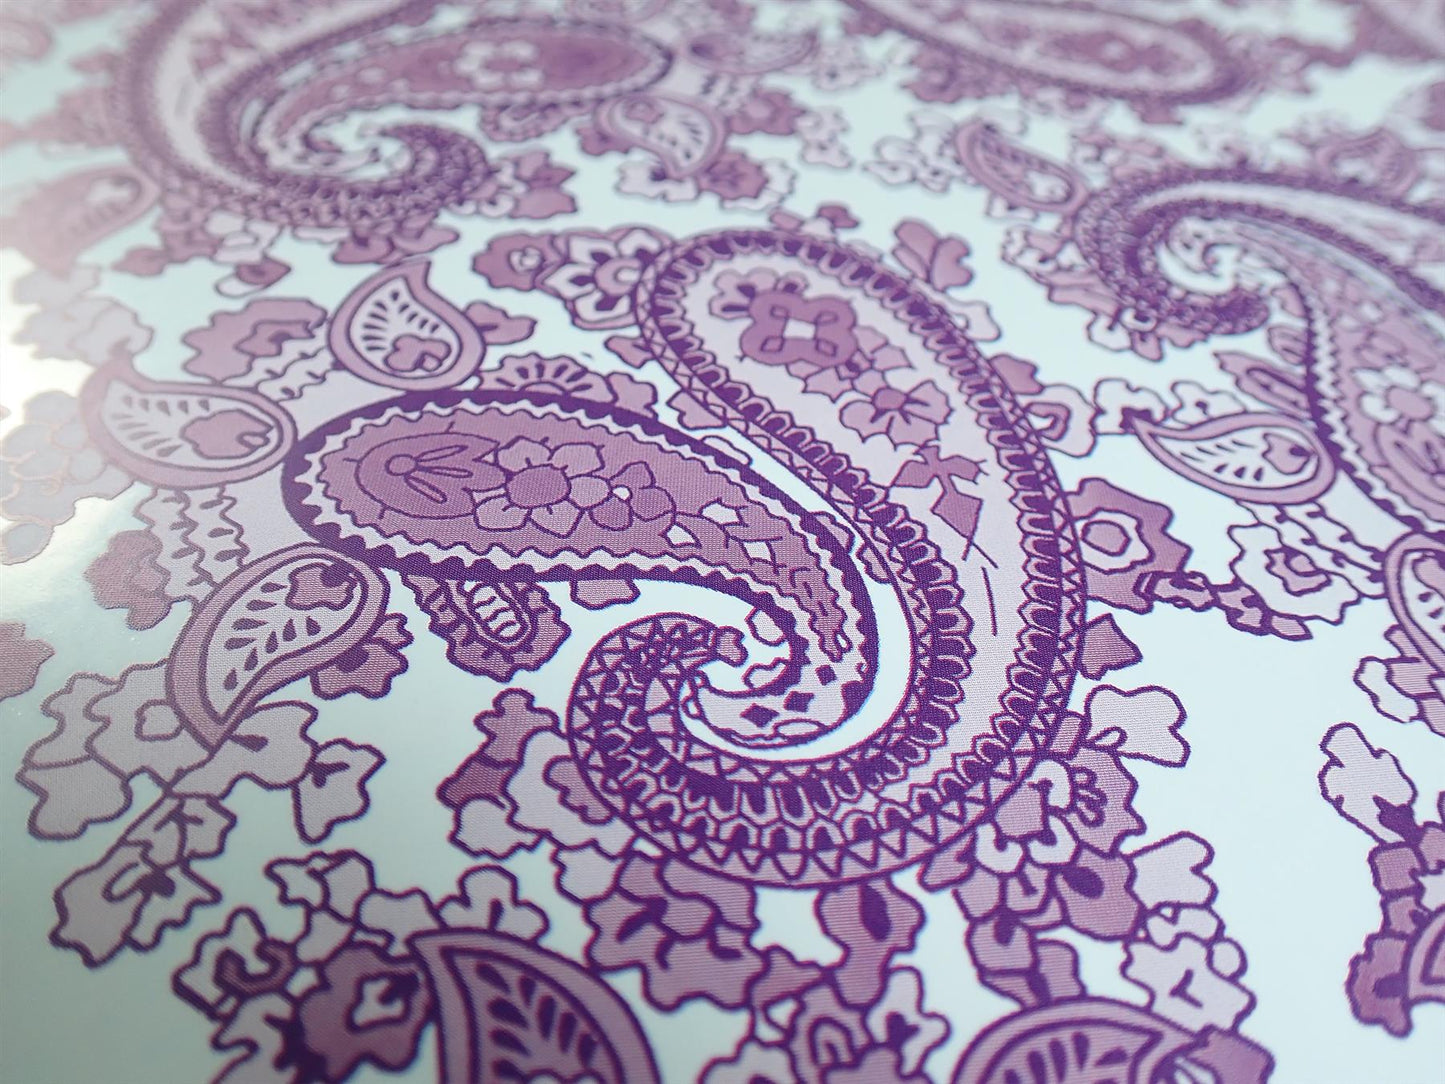 Luthitec Clear Backed Purple Paisley Paper Decal Sheet - 420x295mm (16.5x11.61")